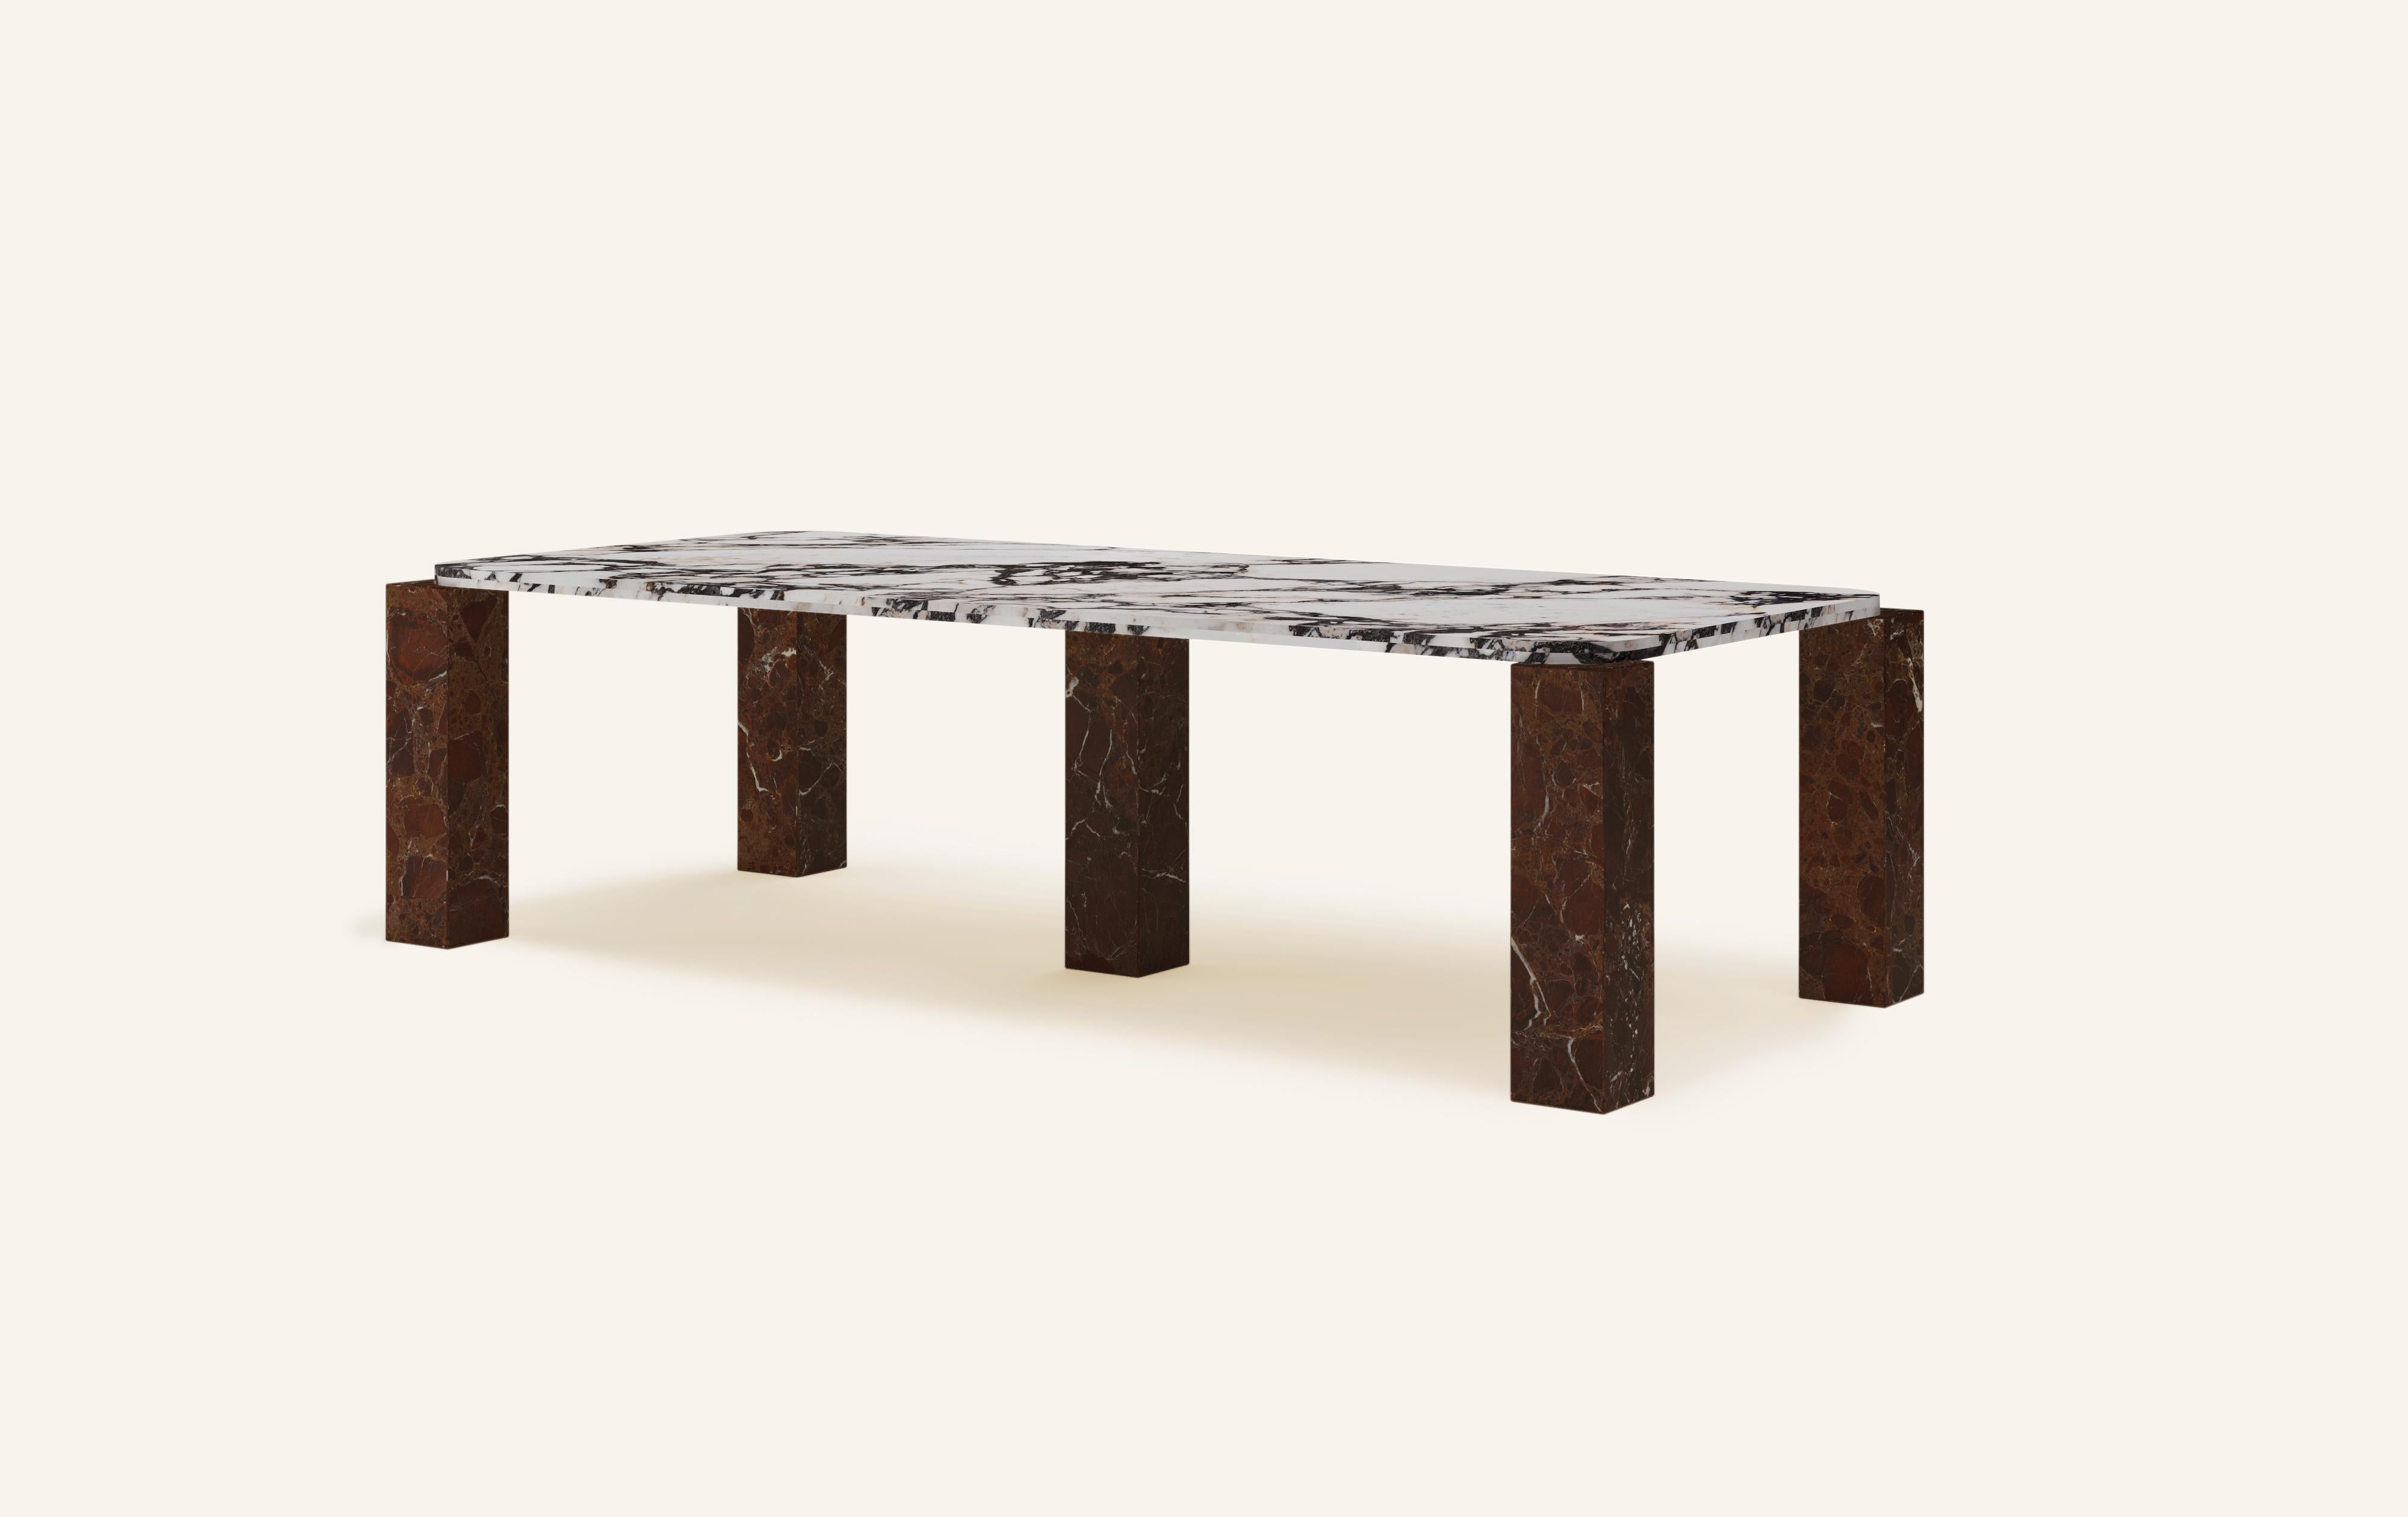 Organic Modern FORM(LA) Cubo Rectangle Dining Table 120”L x 50”W x 30”H Viola & Rosso Marble For Sale